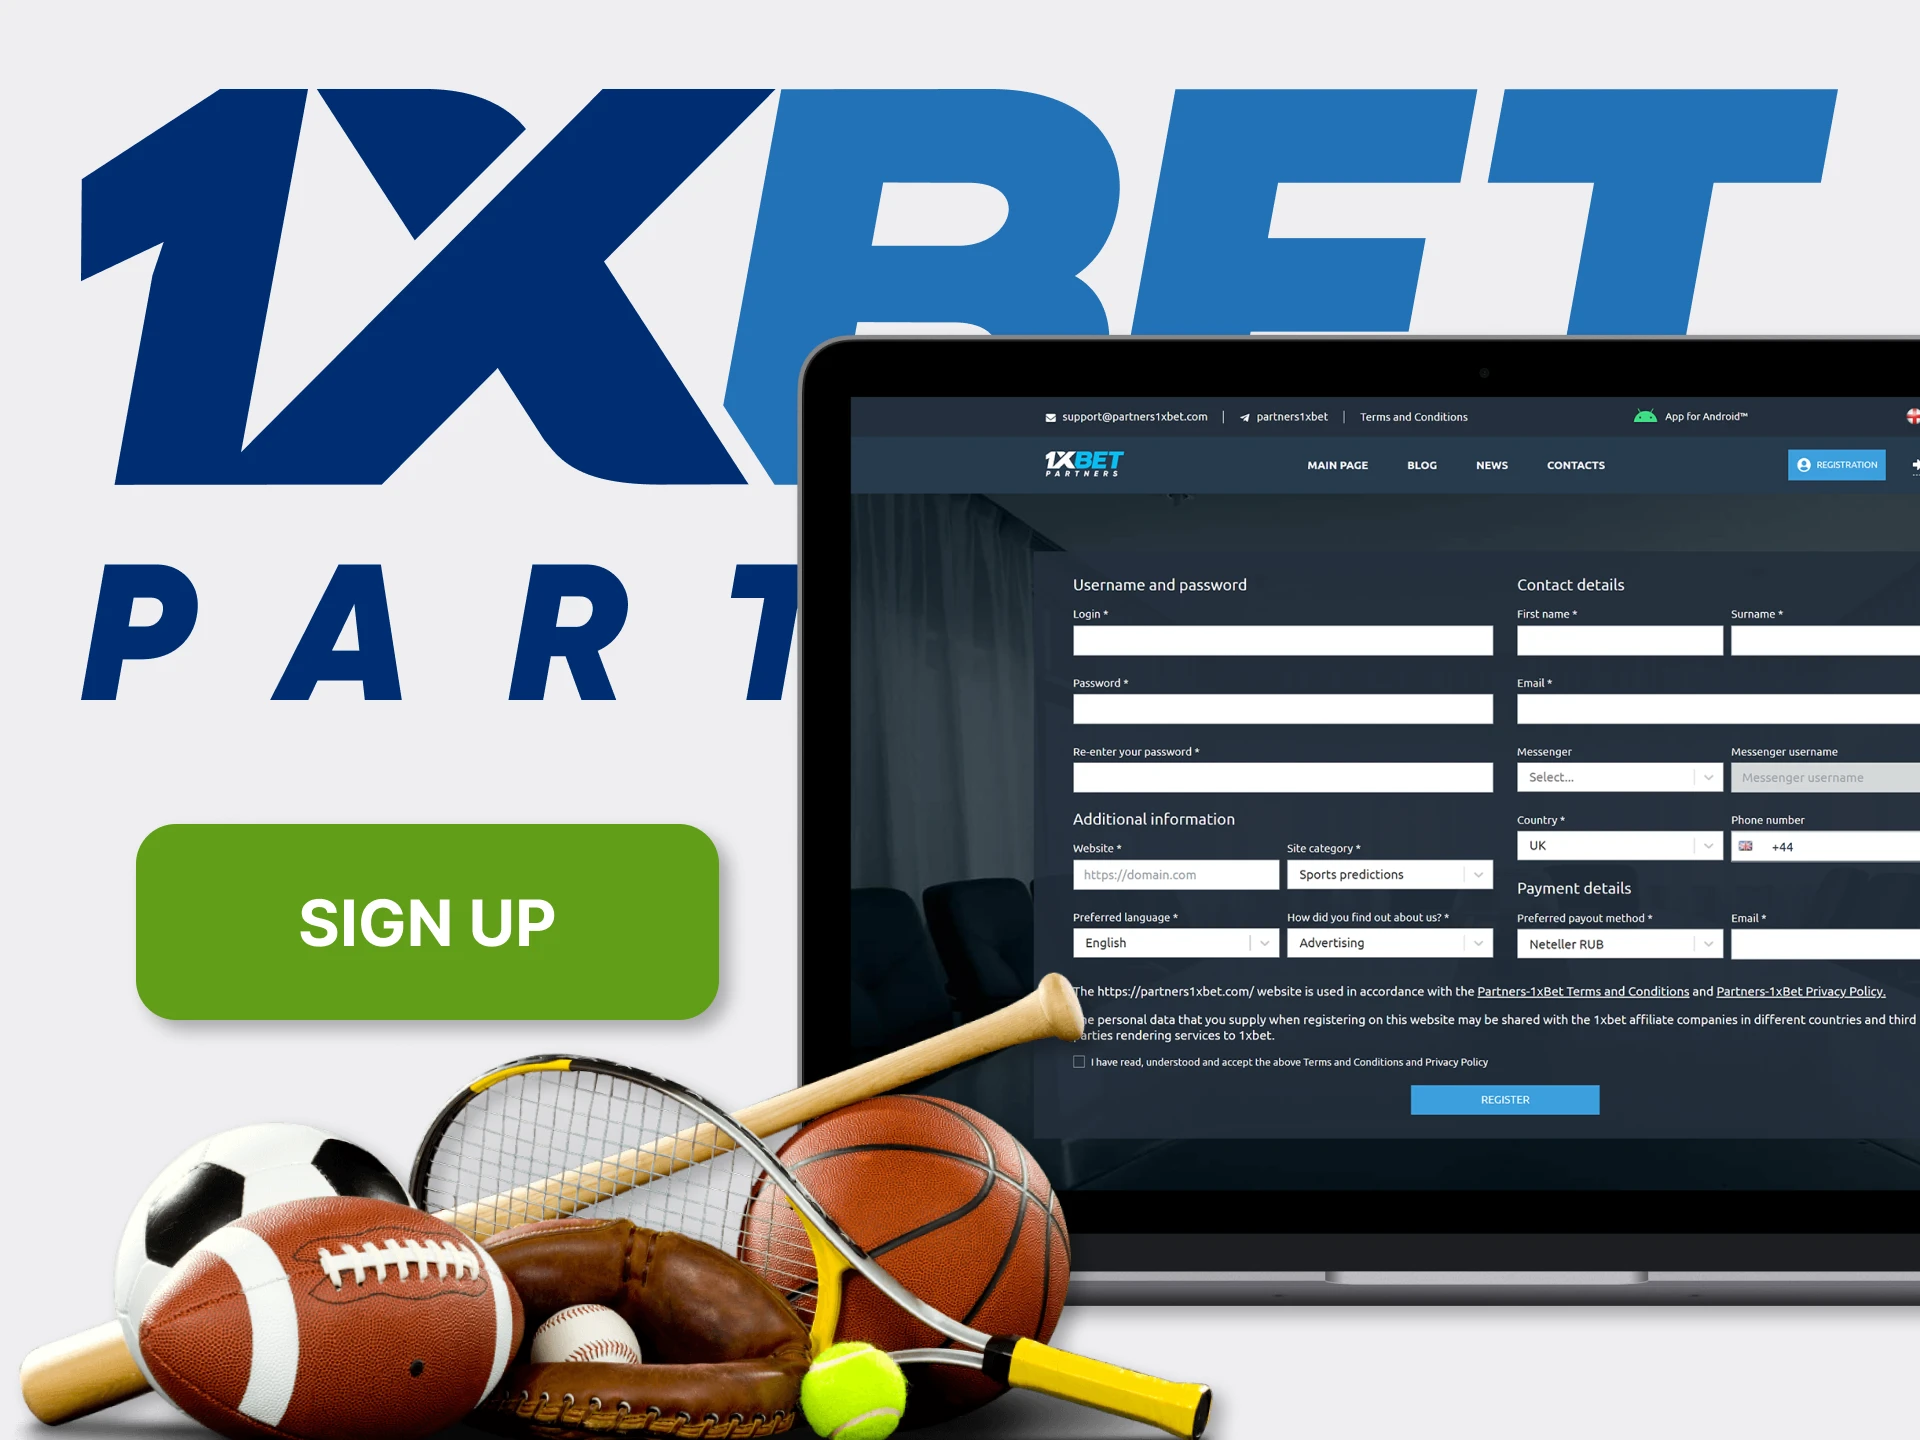 Be sure to register to become a member of the 1xBet affiliate program.